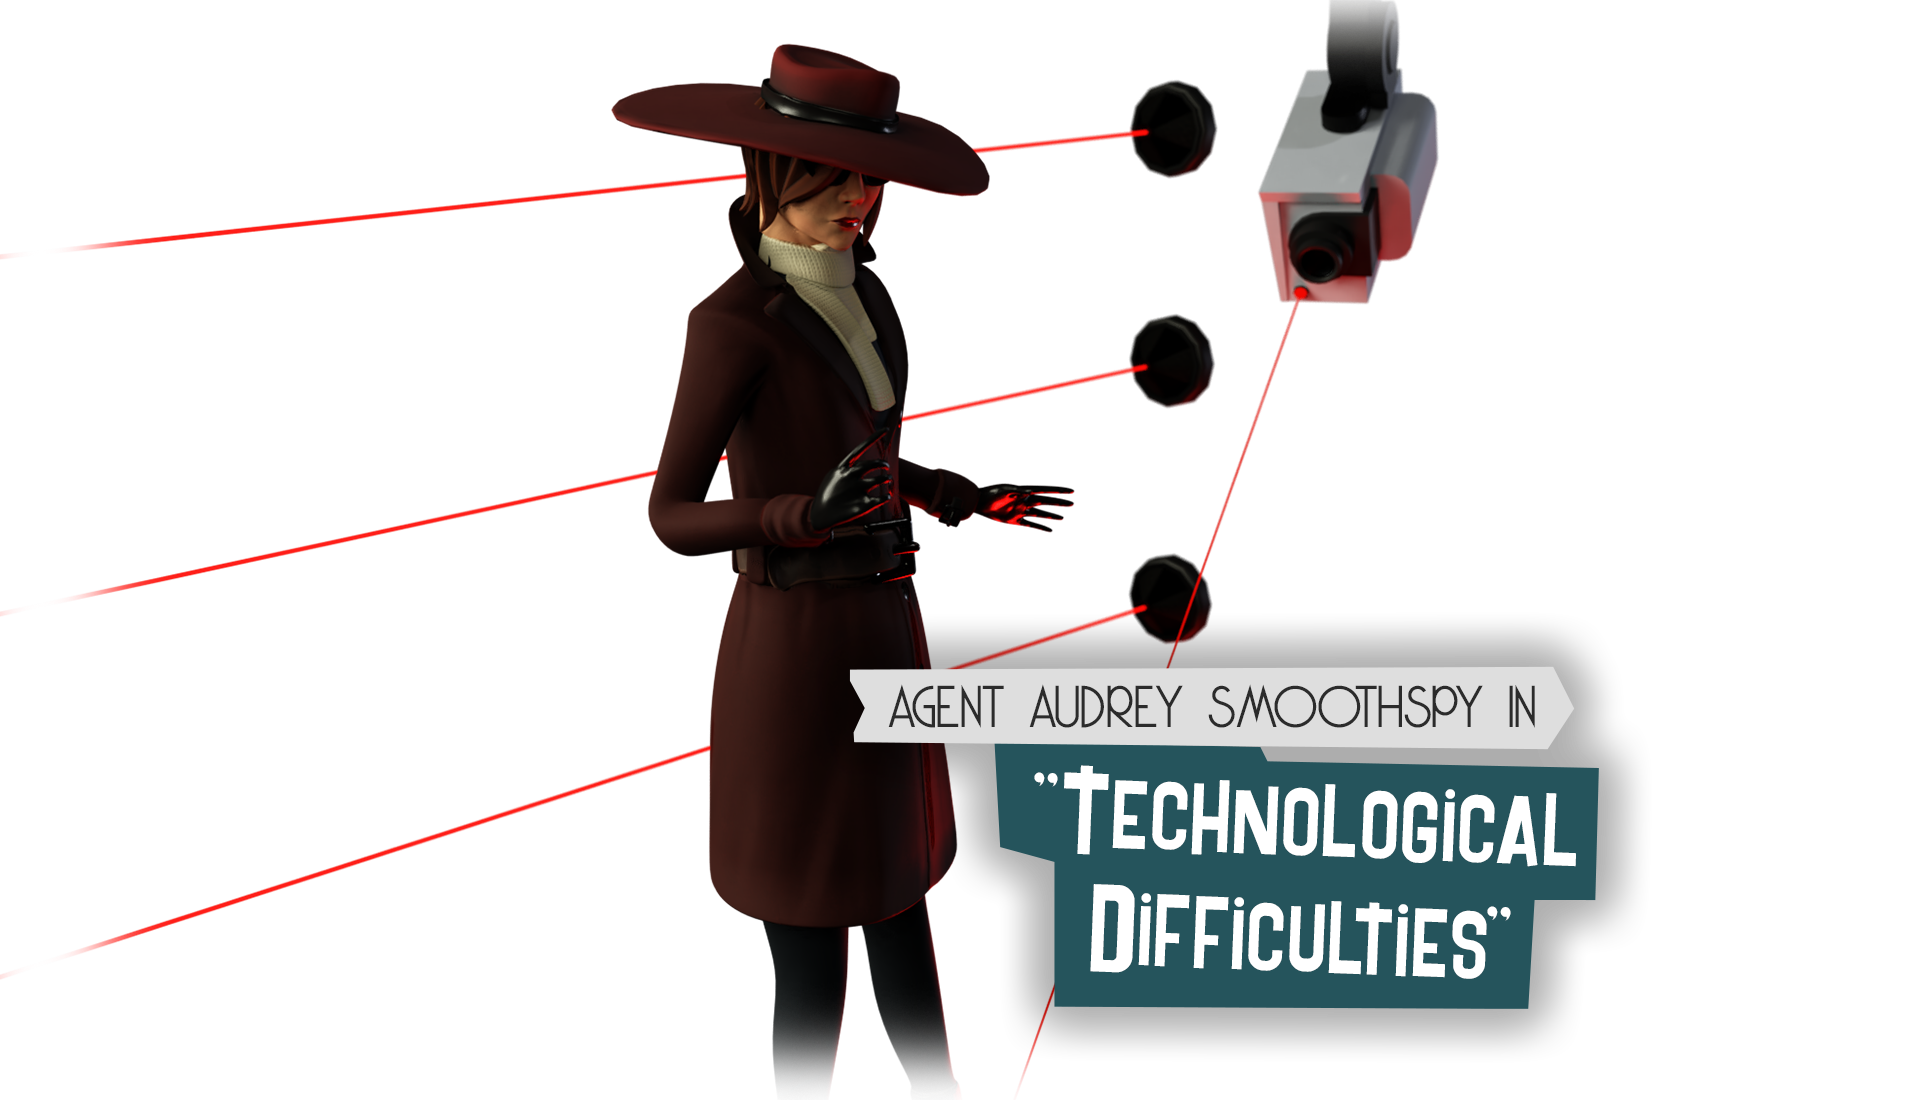 📷💥 0.13.0 &quot;TECHNOLOGICAL DIFFICULTIES&quot; UPDATE · The Spy Who Shrunk Me update for 29 March 2019 · SteamDB